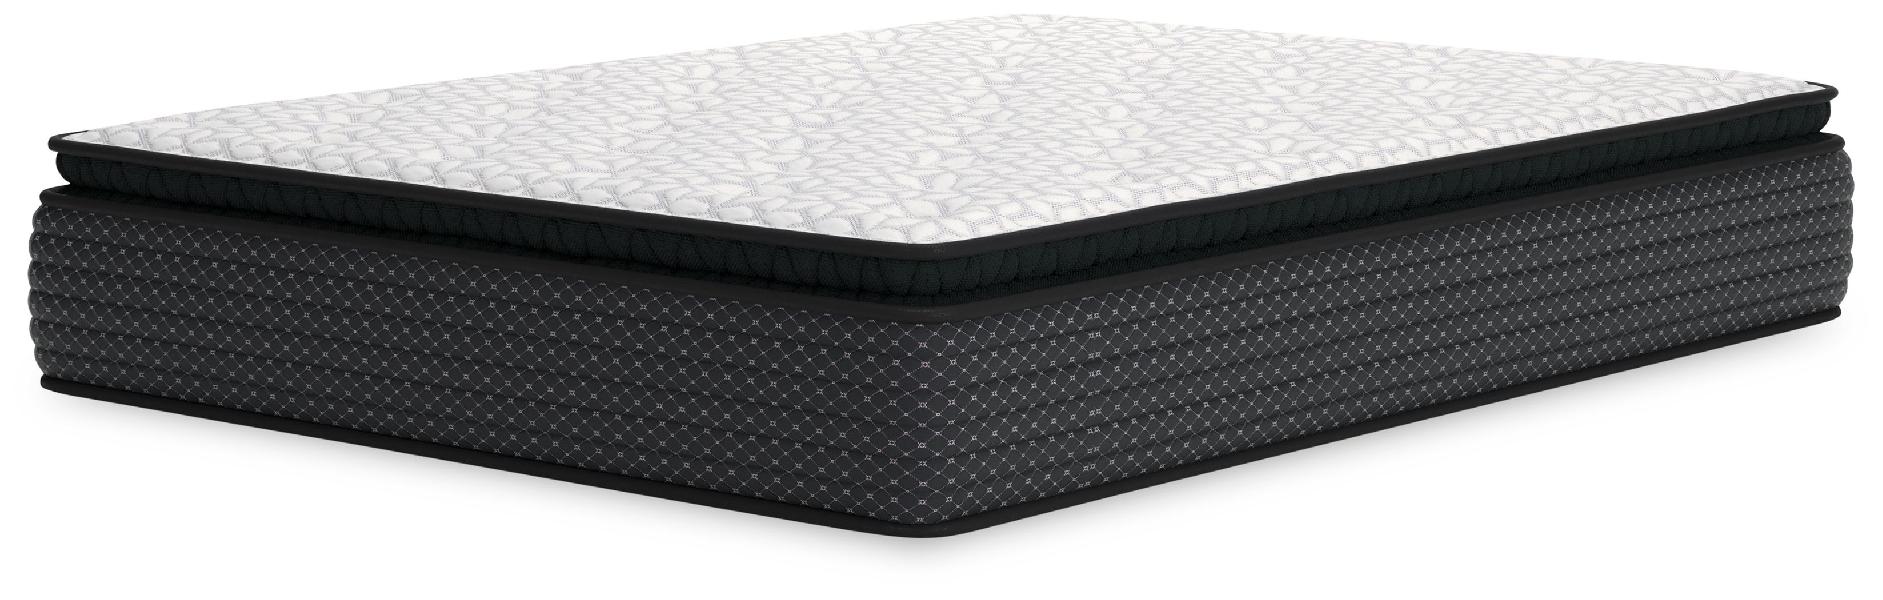 Image of Limited Edition Pt - White - Queen Mattress